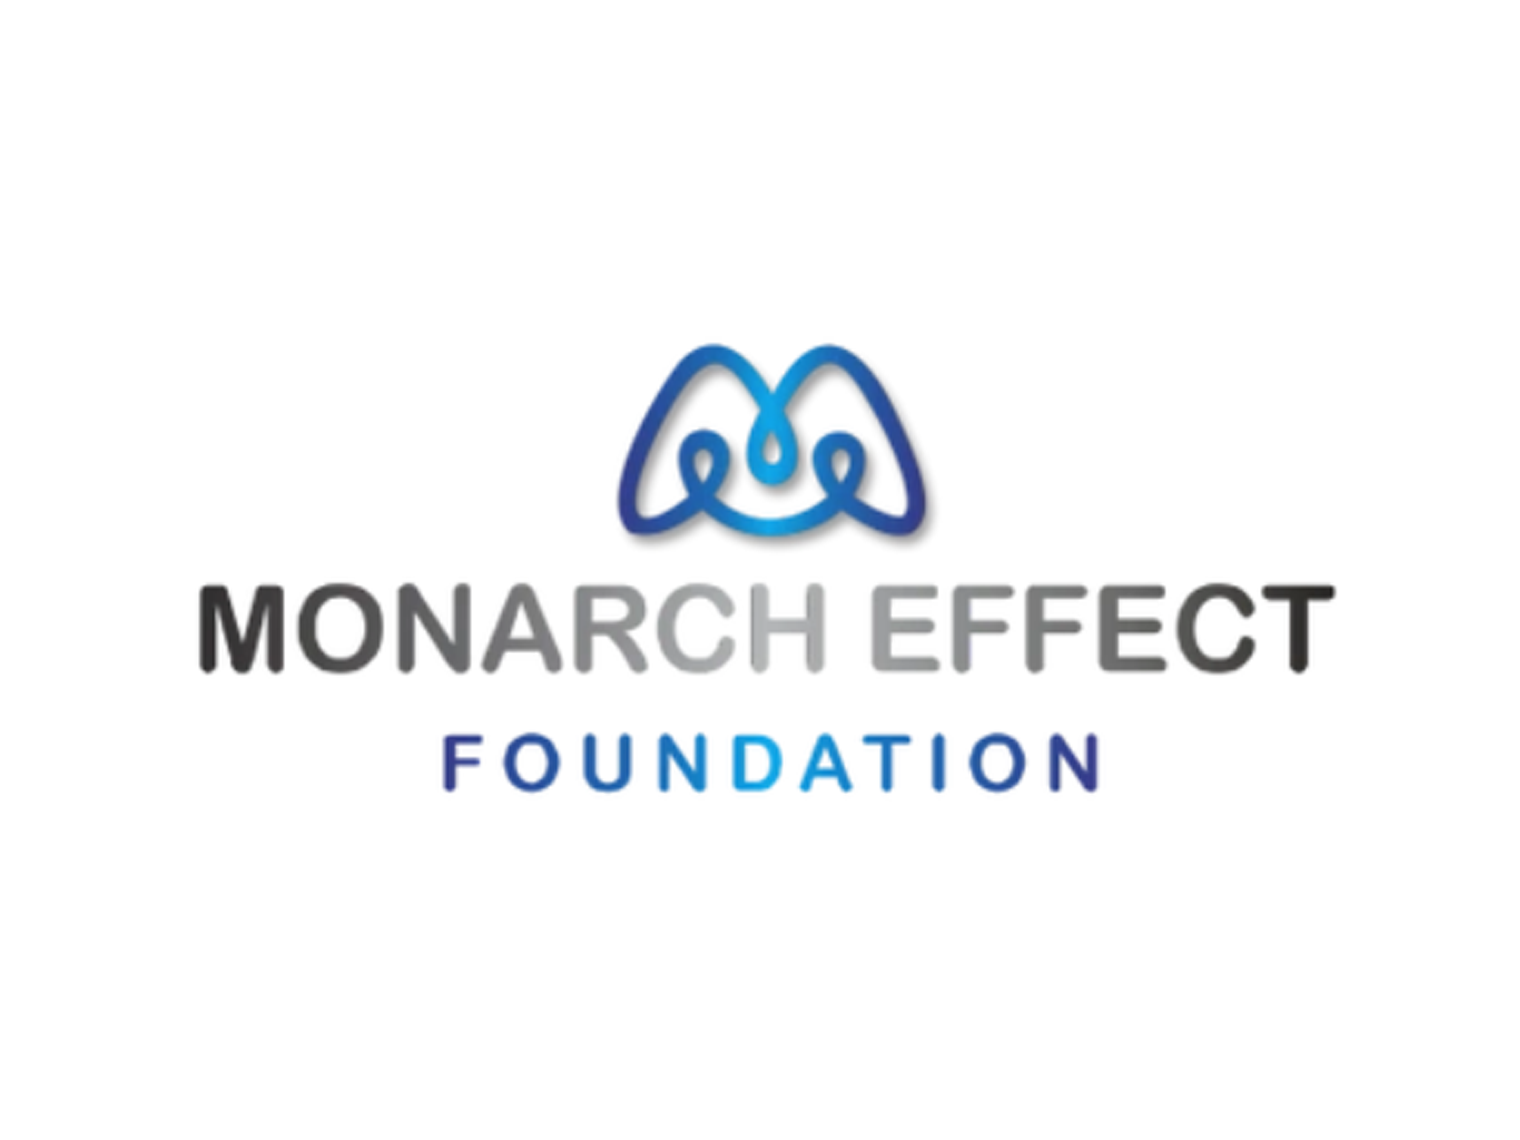 Monarch Effect Foundation - Building a Middle Class in Los Cabos through Education